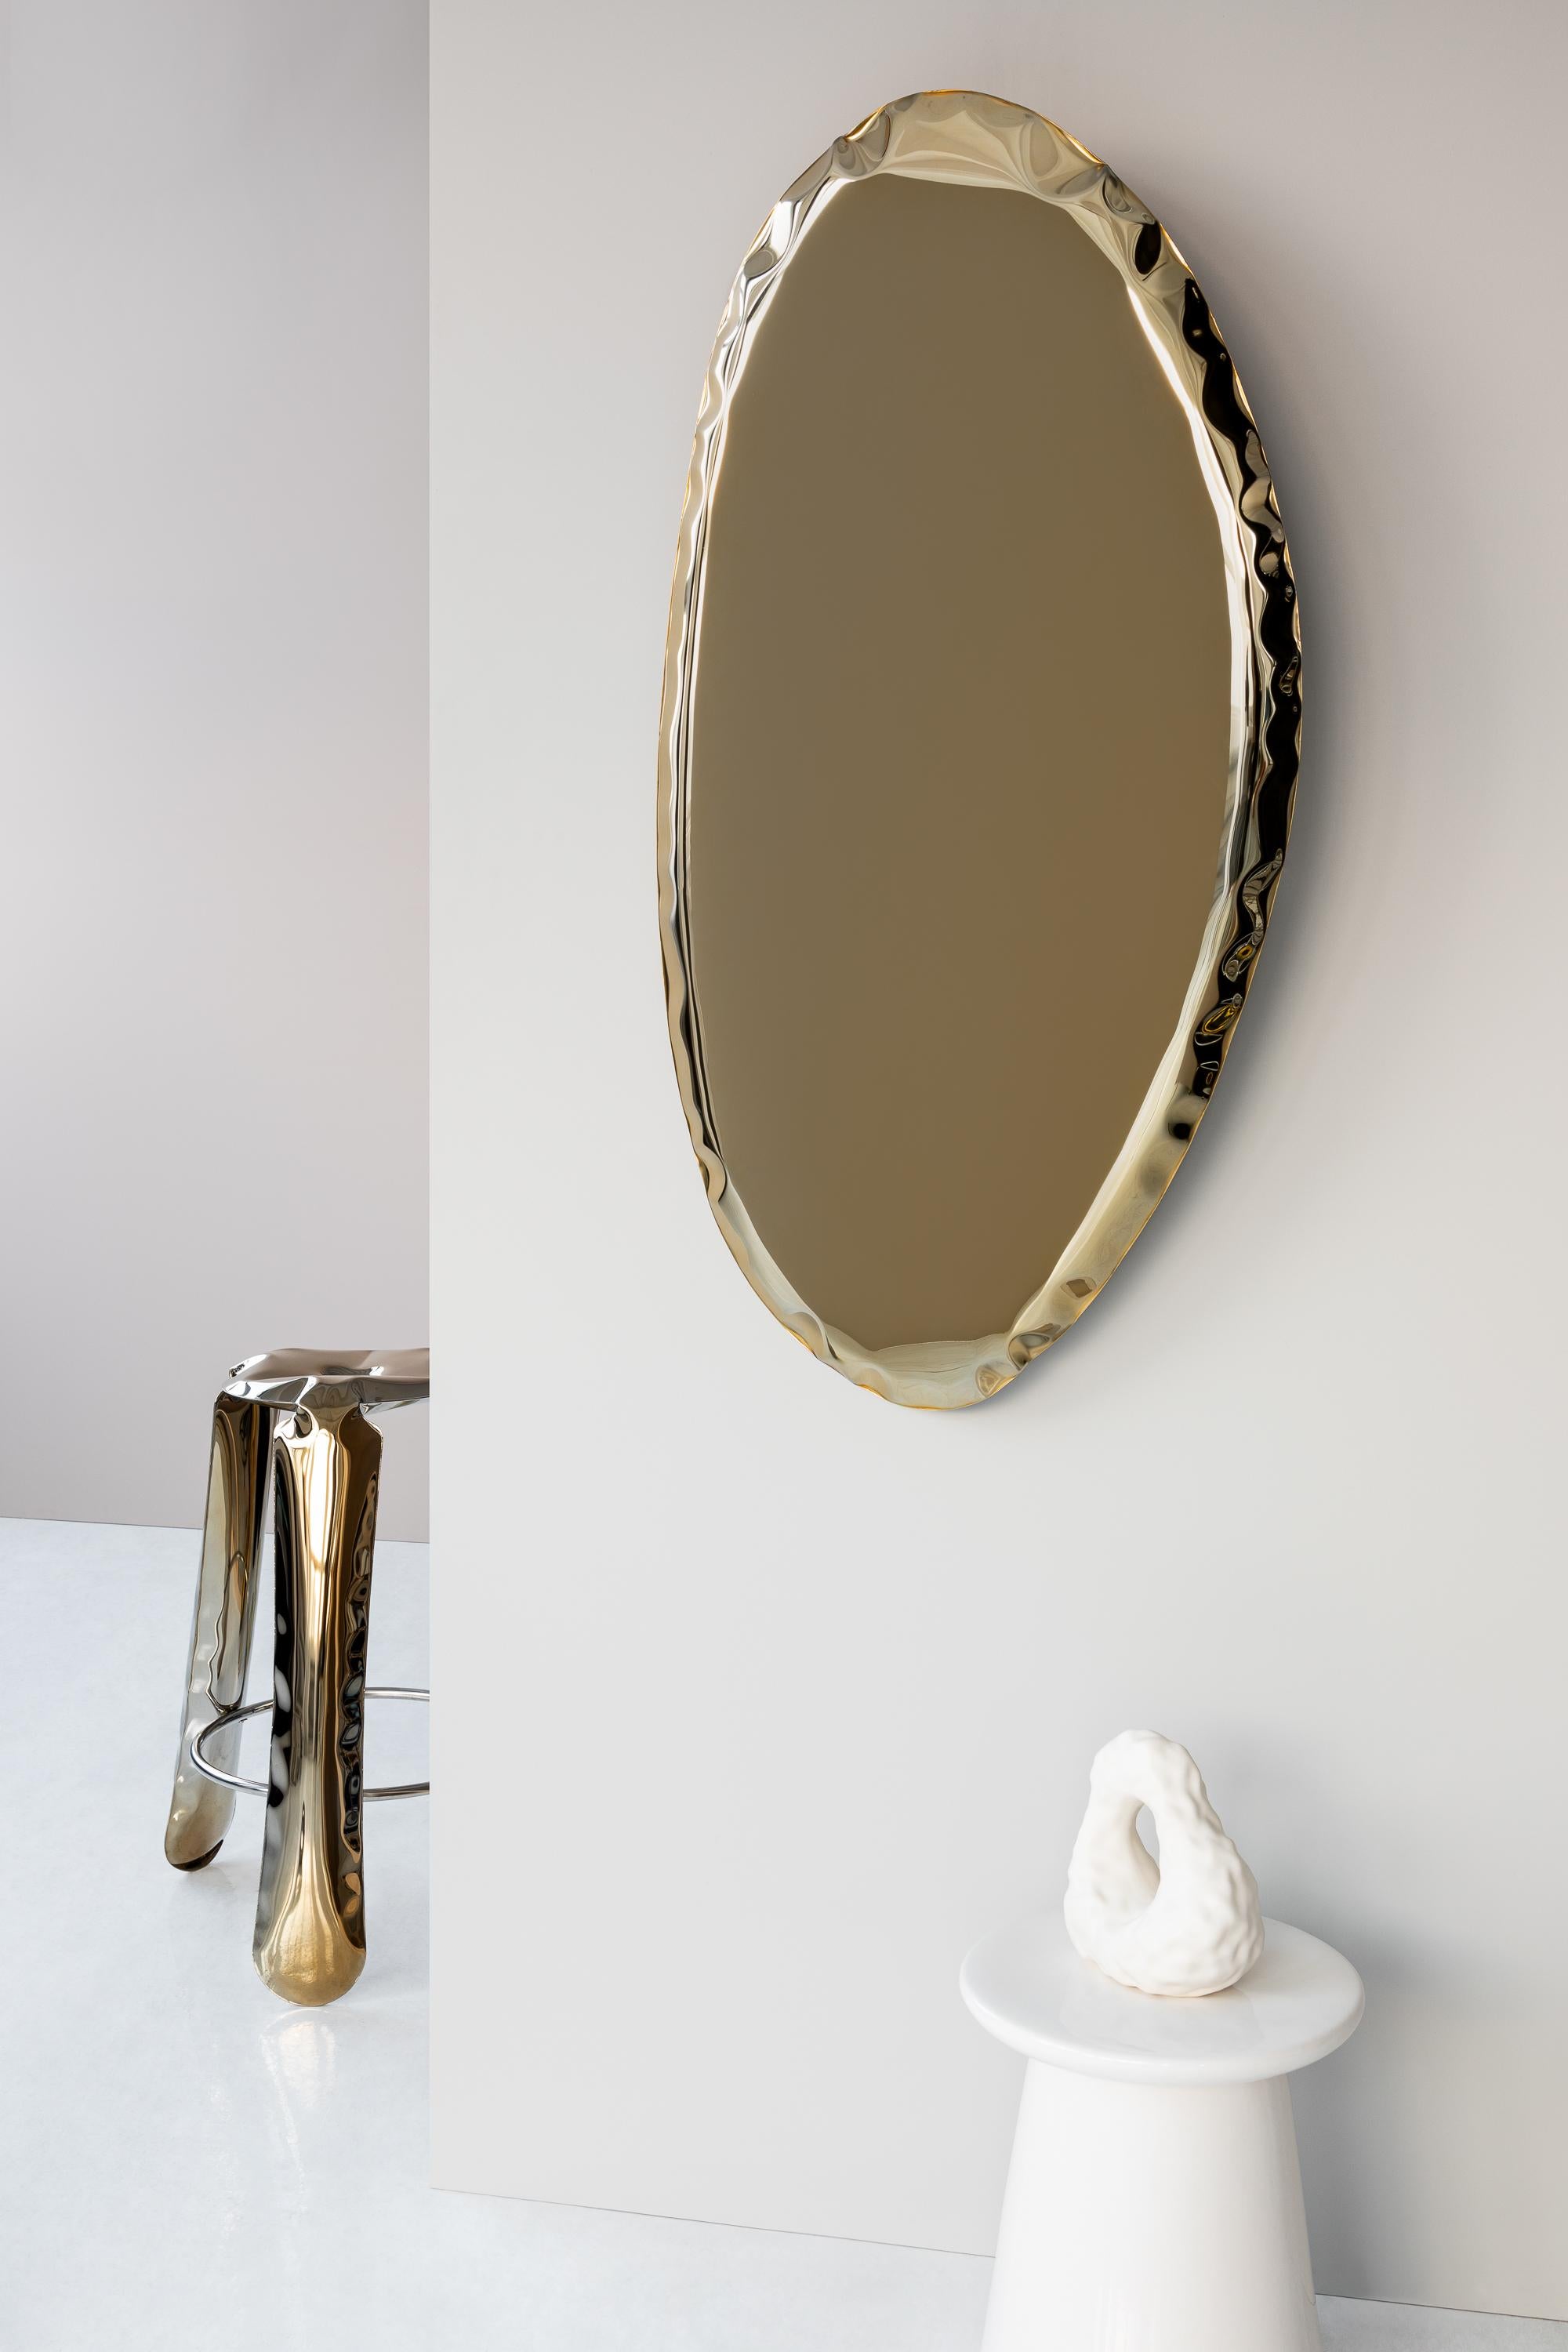 Contemporary Rose Gold Tafla O3 Wall Mirror by Zieta For Sale